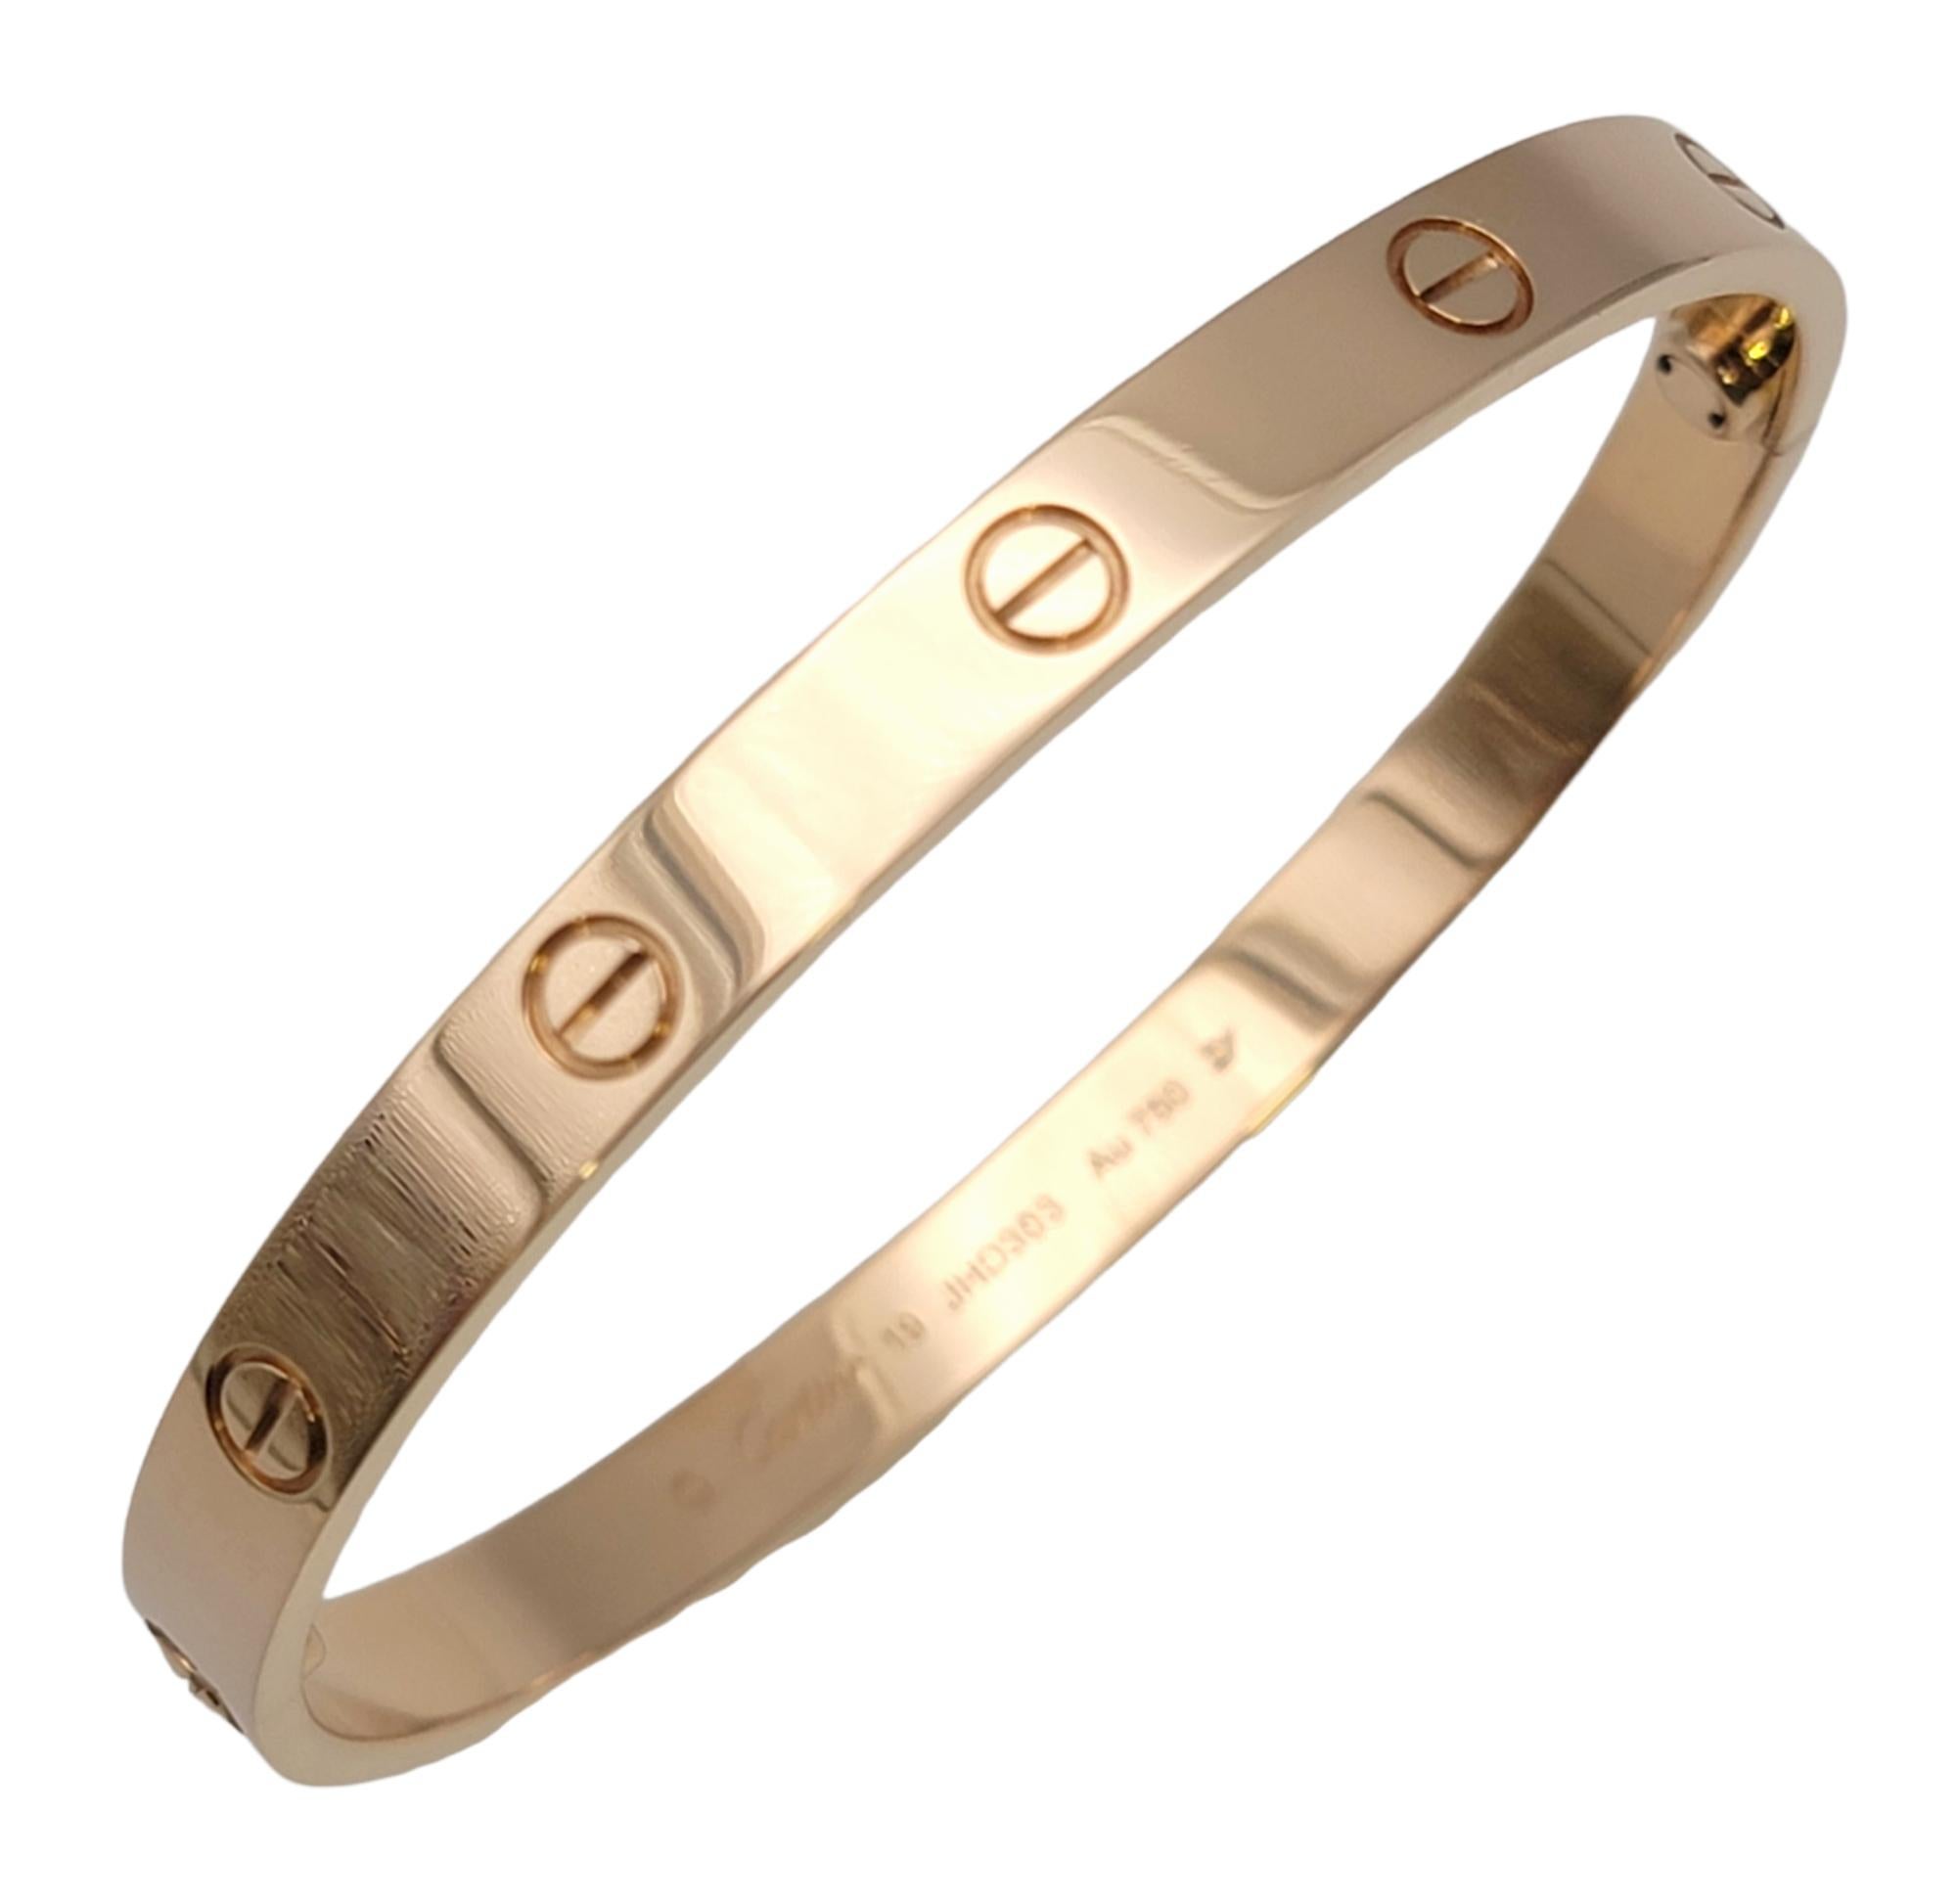 Iconic Love bangle bracelet from luxury jeweler, Cartier. This simple, yet effortlessly timeless piece makes a chic statement on the wrist. With its clean lines, perfect symmetry, and flawless elegance, this bracelet will remain one of your jewelry